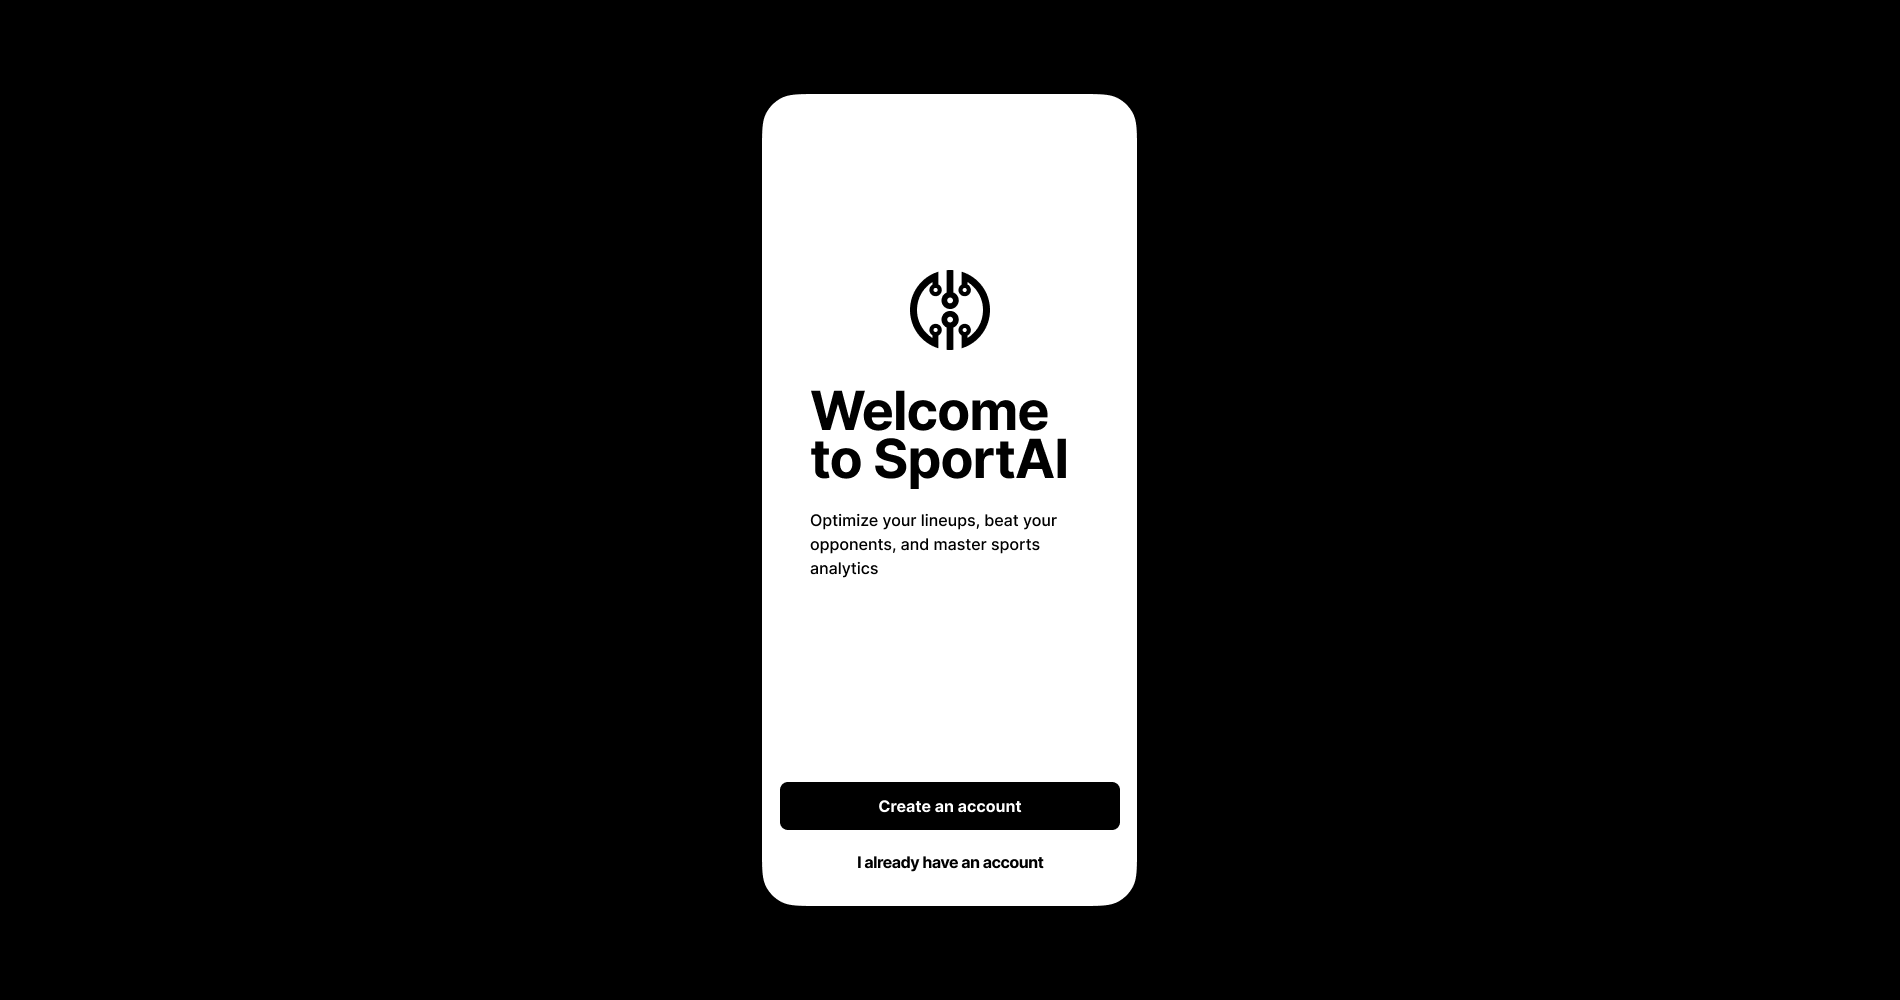 The app's welcome page. Welcome to SportAI. Optimize your lineups, beat your opponents, and master sports analytics.